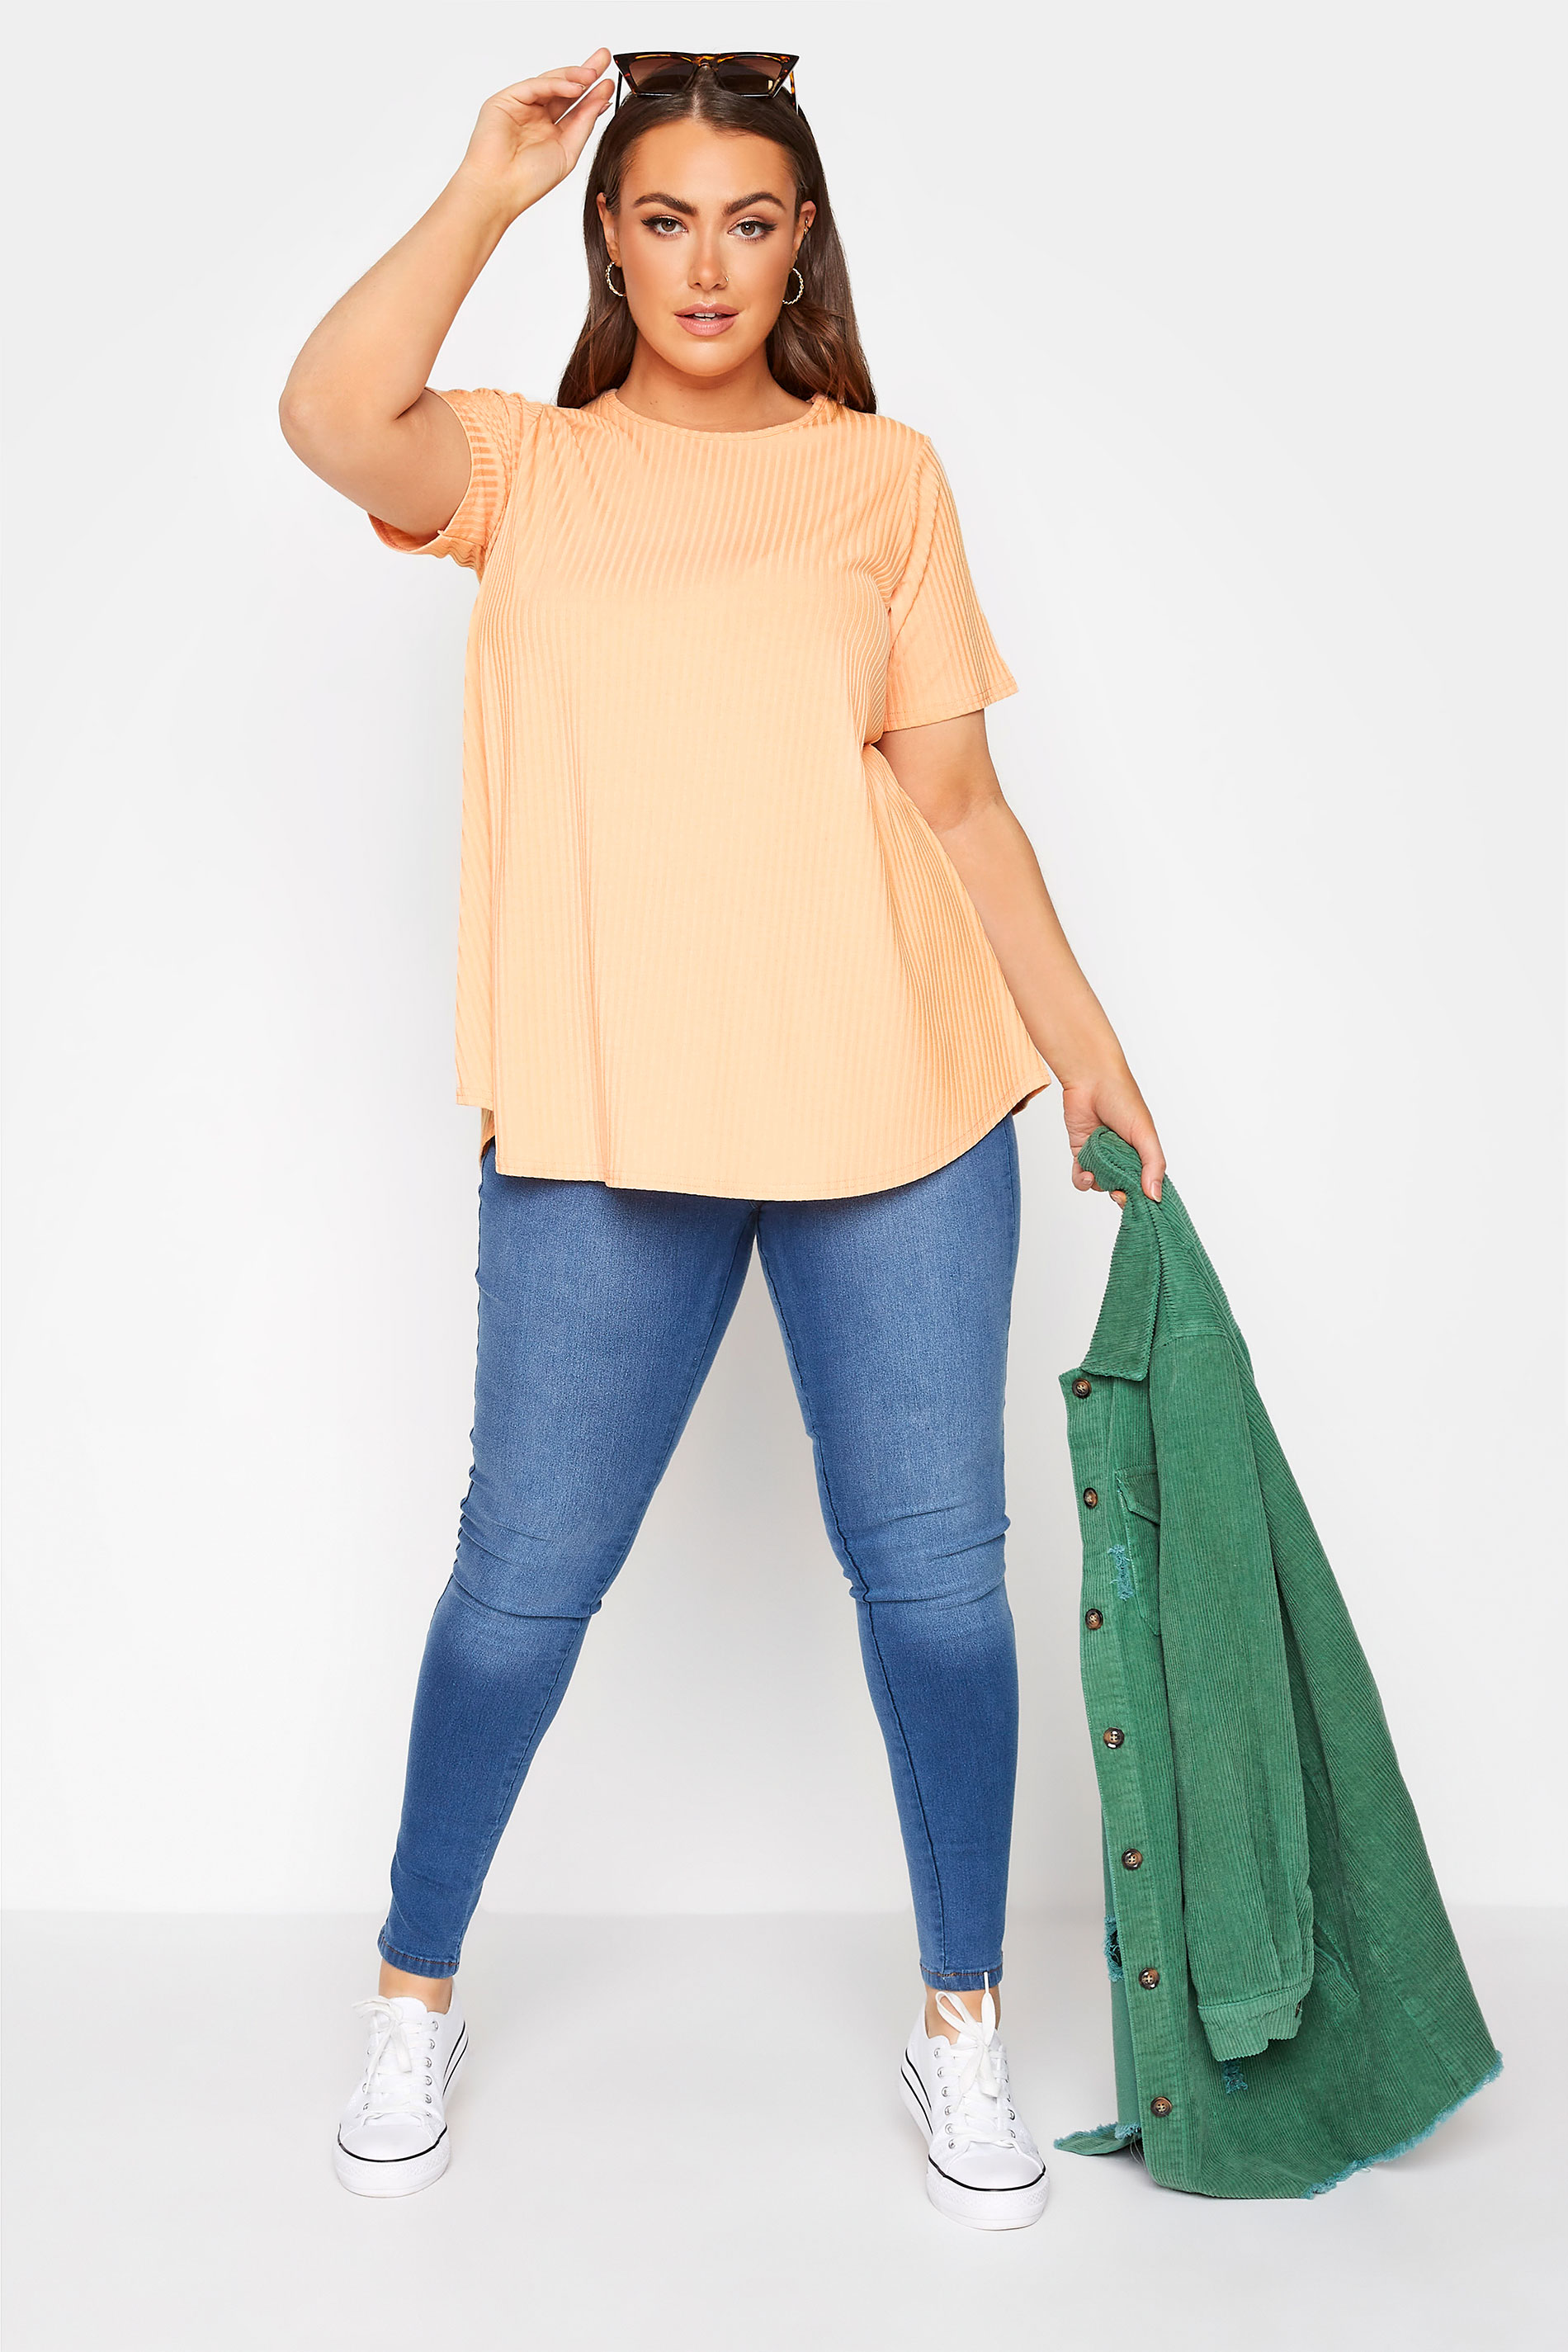 Grande taille  Tops Grande taille  Tops Jersey | LIMITED COLLECTION - Top Orange Pastel Nervuré Style Volanté - BW45601